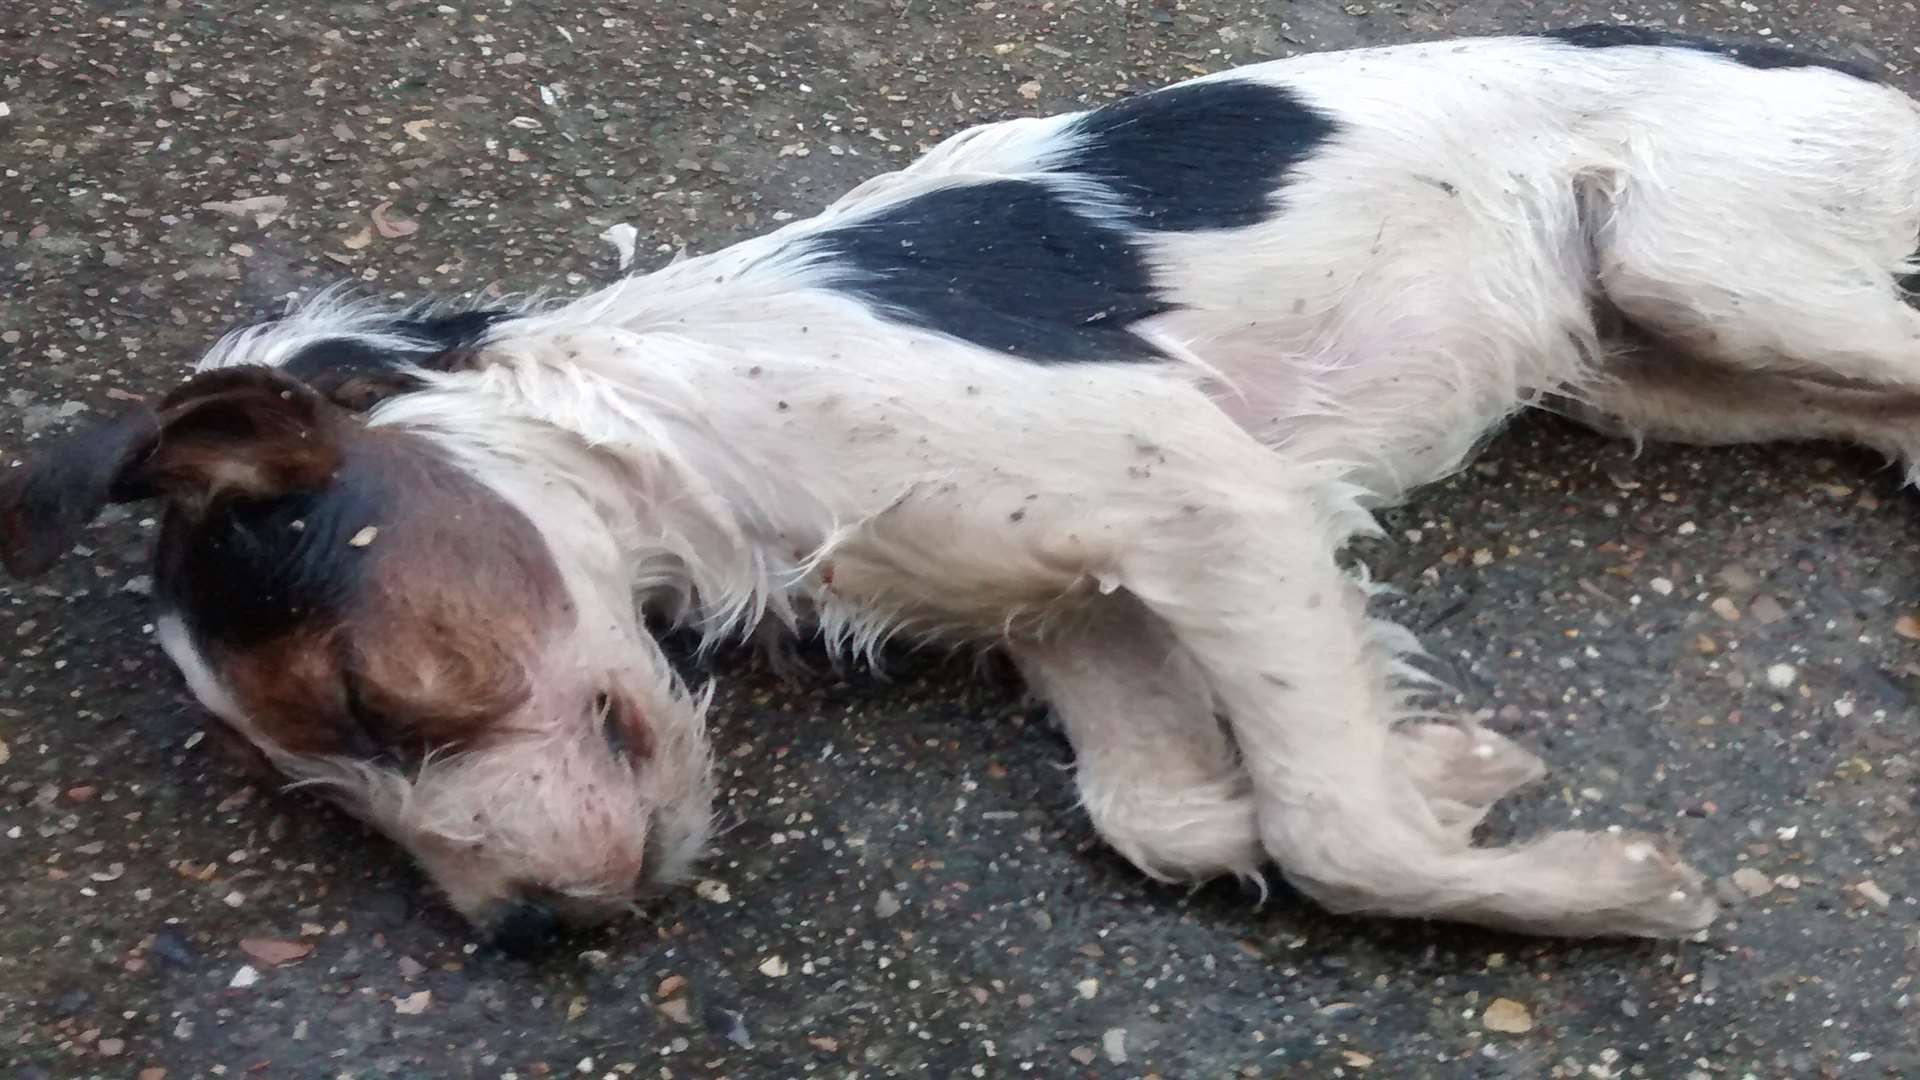 The dog was found inside a bag in Maidstone